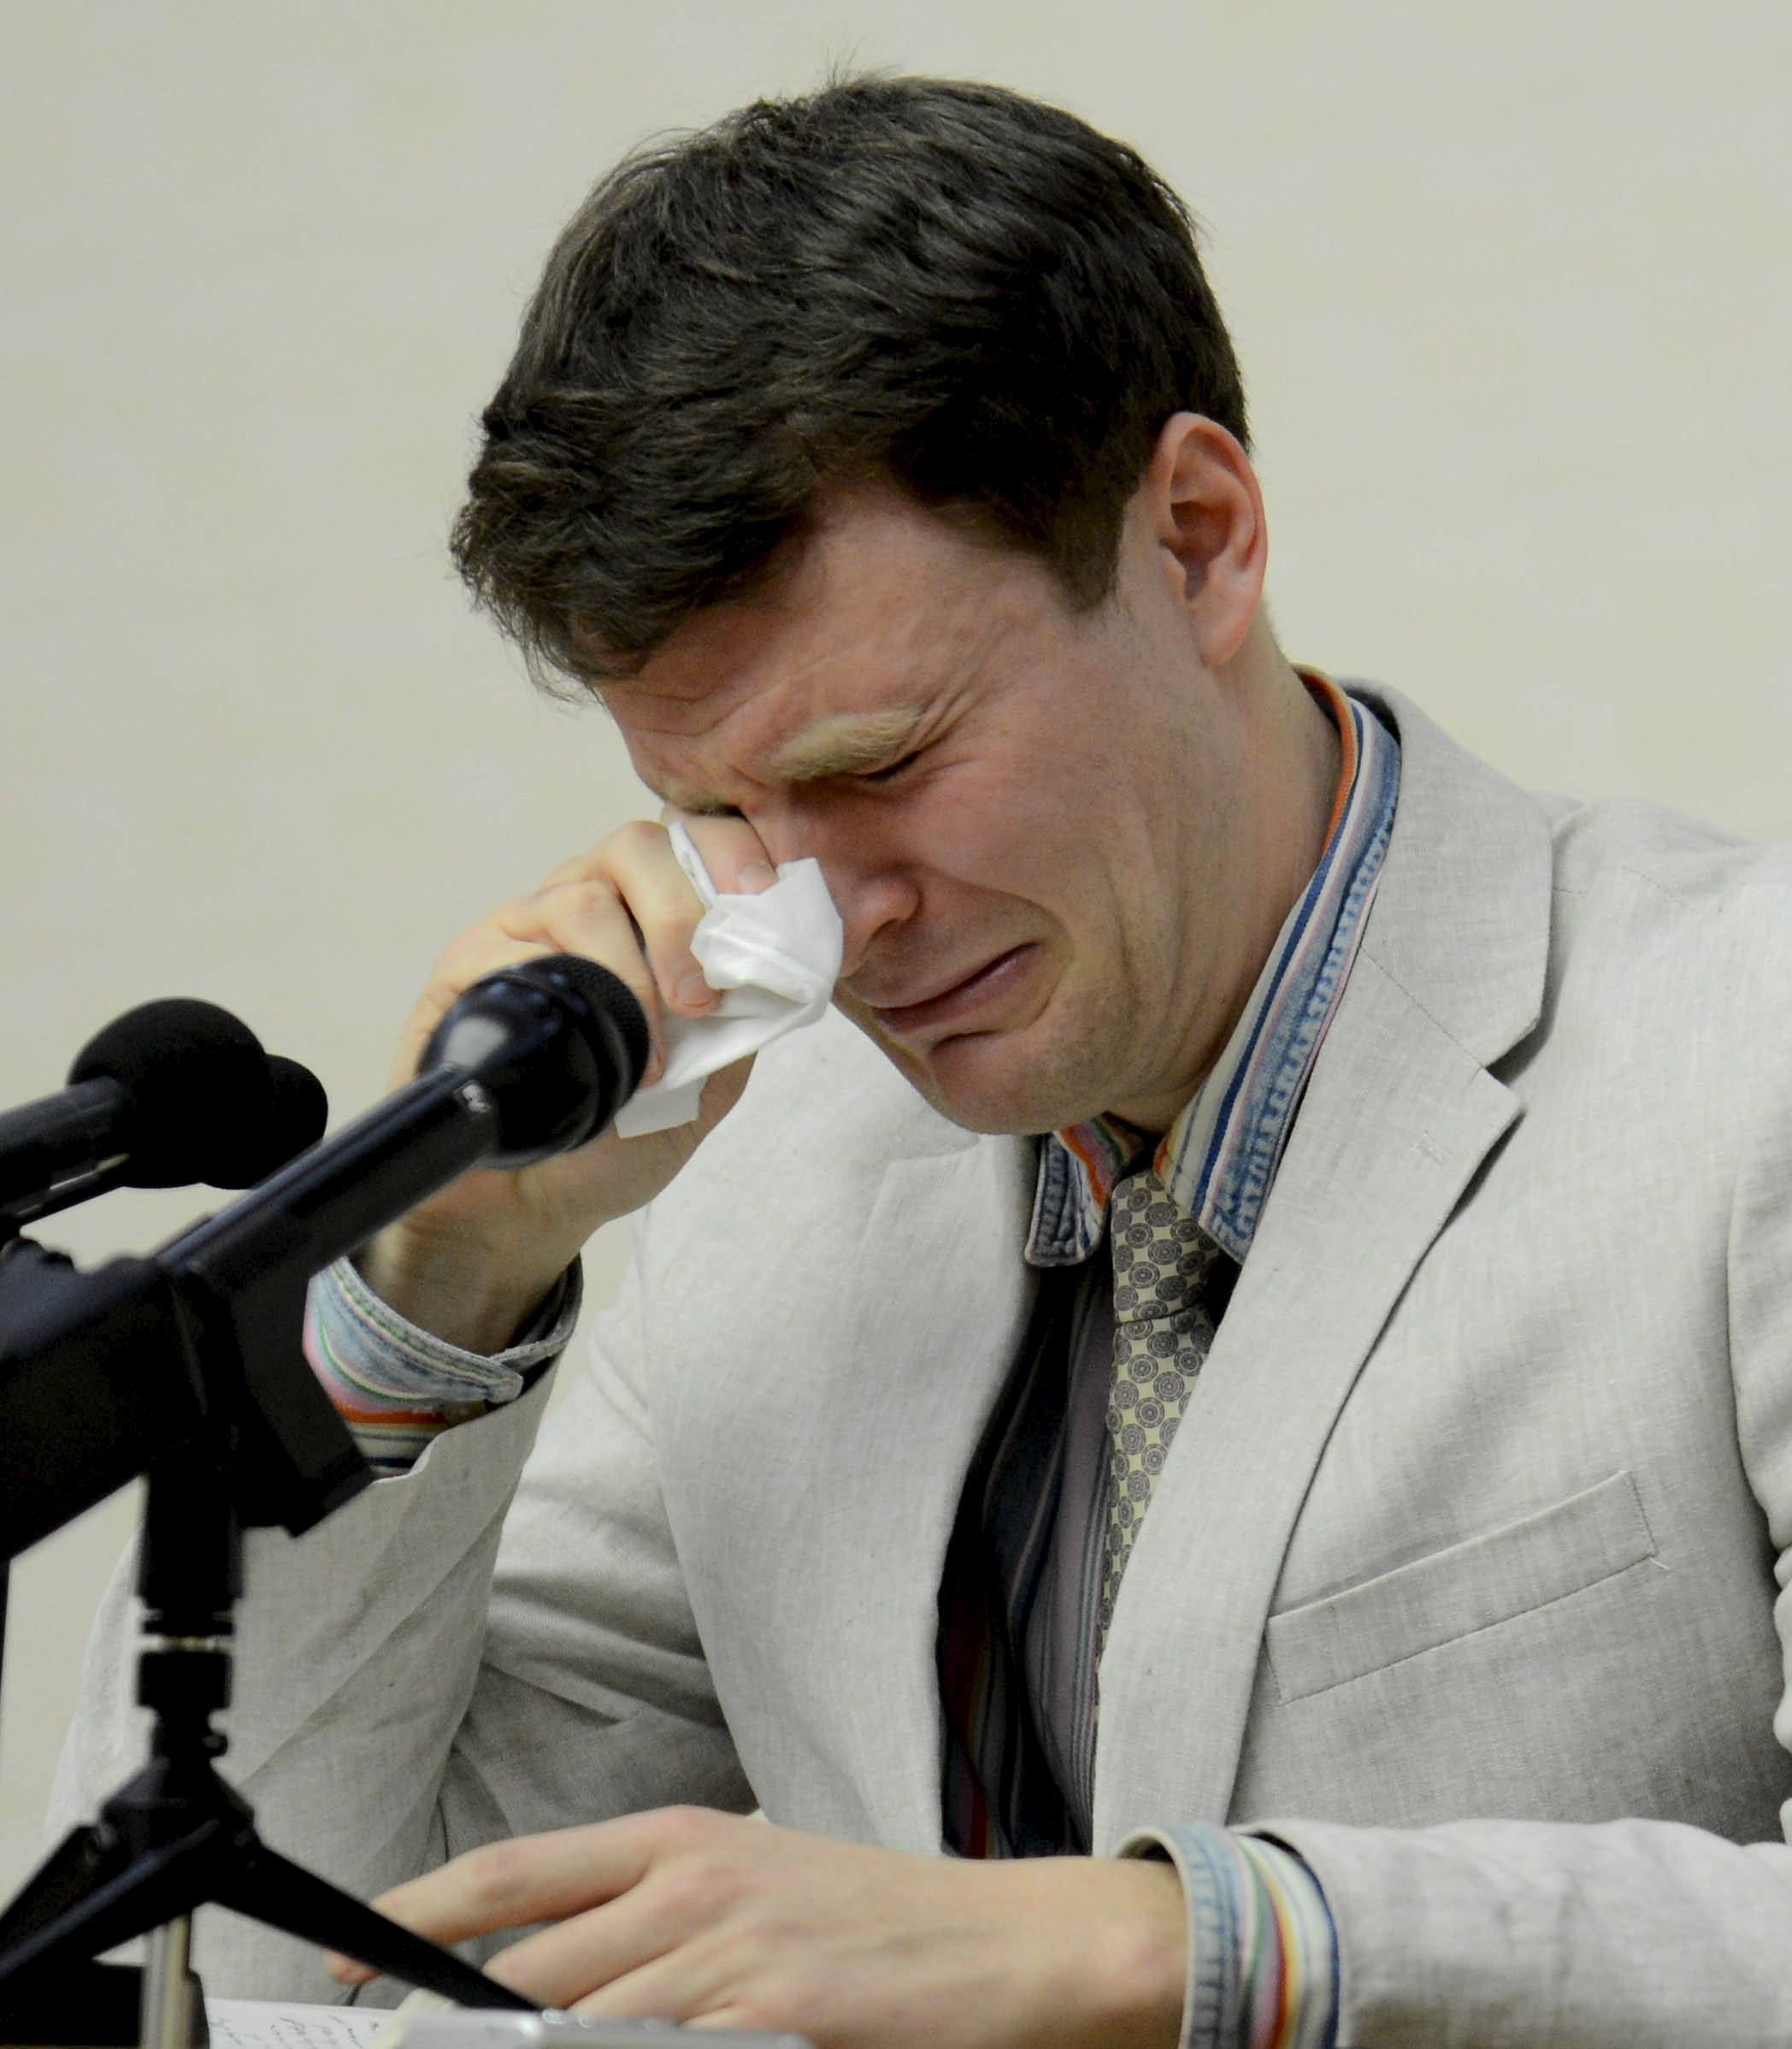 U.S. student Warmbier reacts at a news conference in this undated photo released by North Korea's Korean Central News Agency (KCNA) in Pyongyang